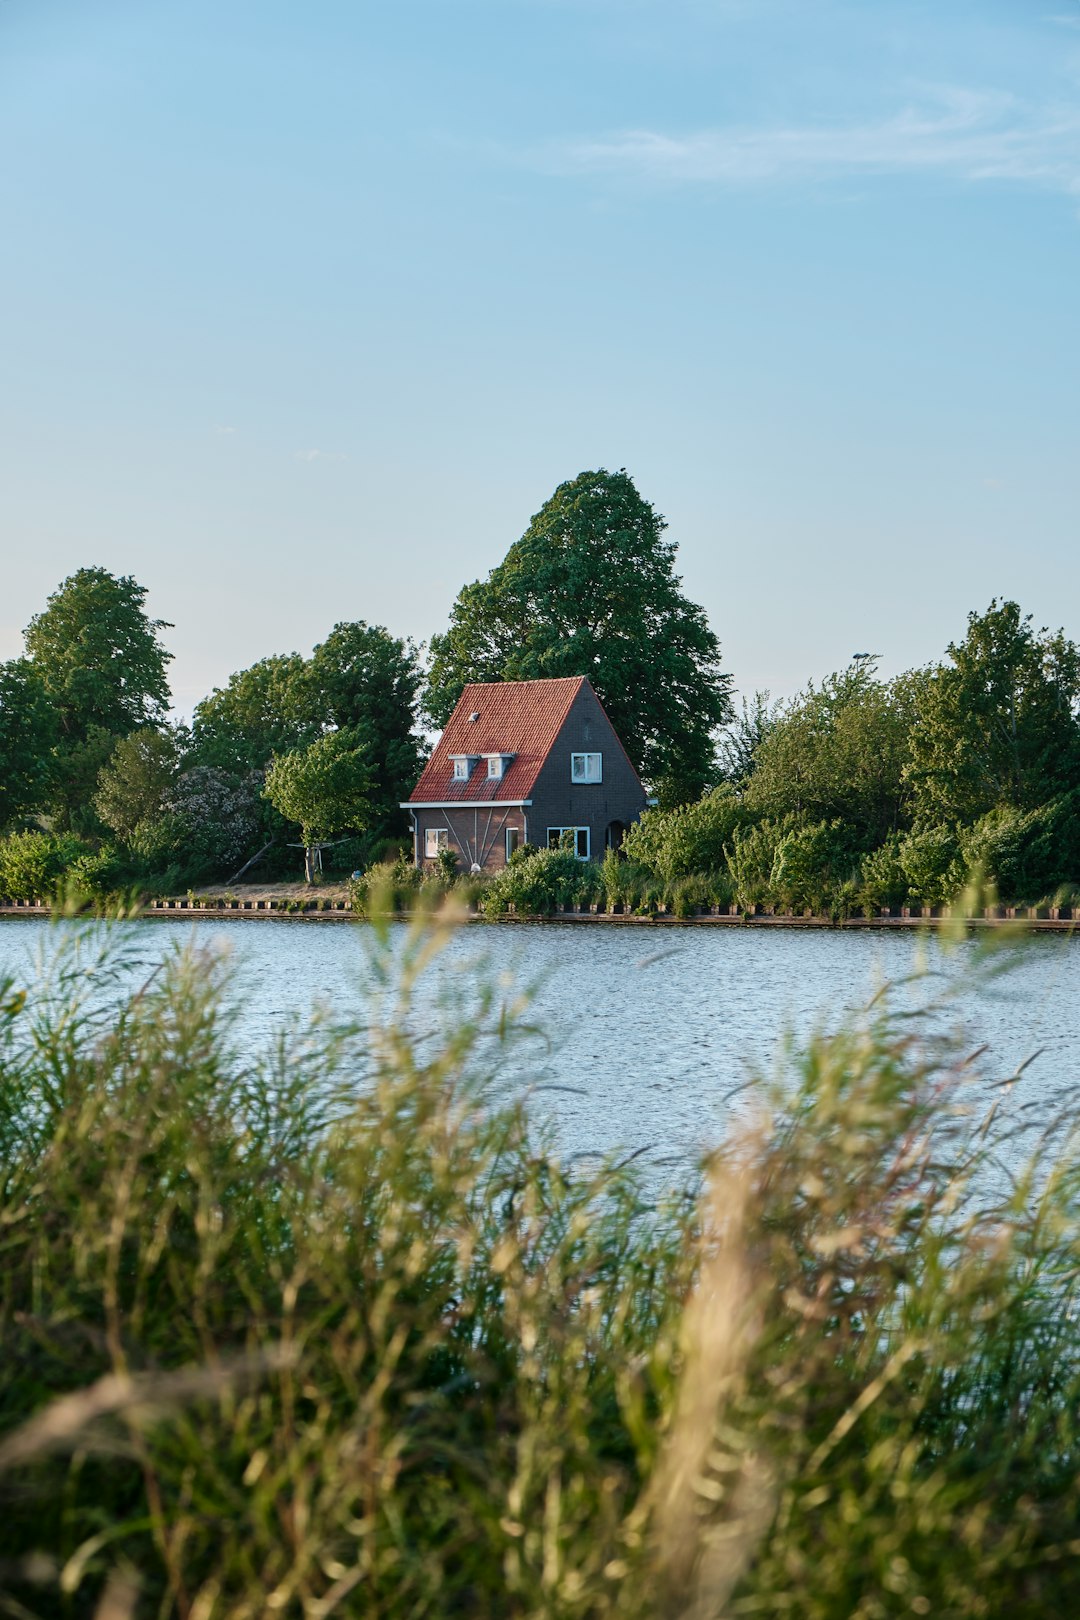 Travel Tips and Stories of Houten in Netherlands